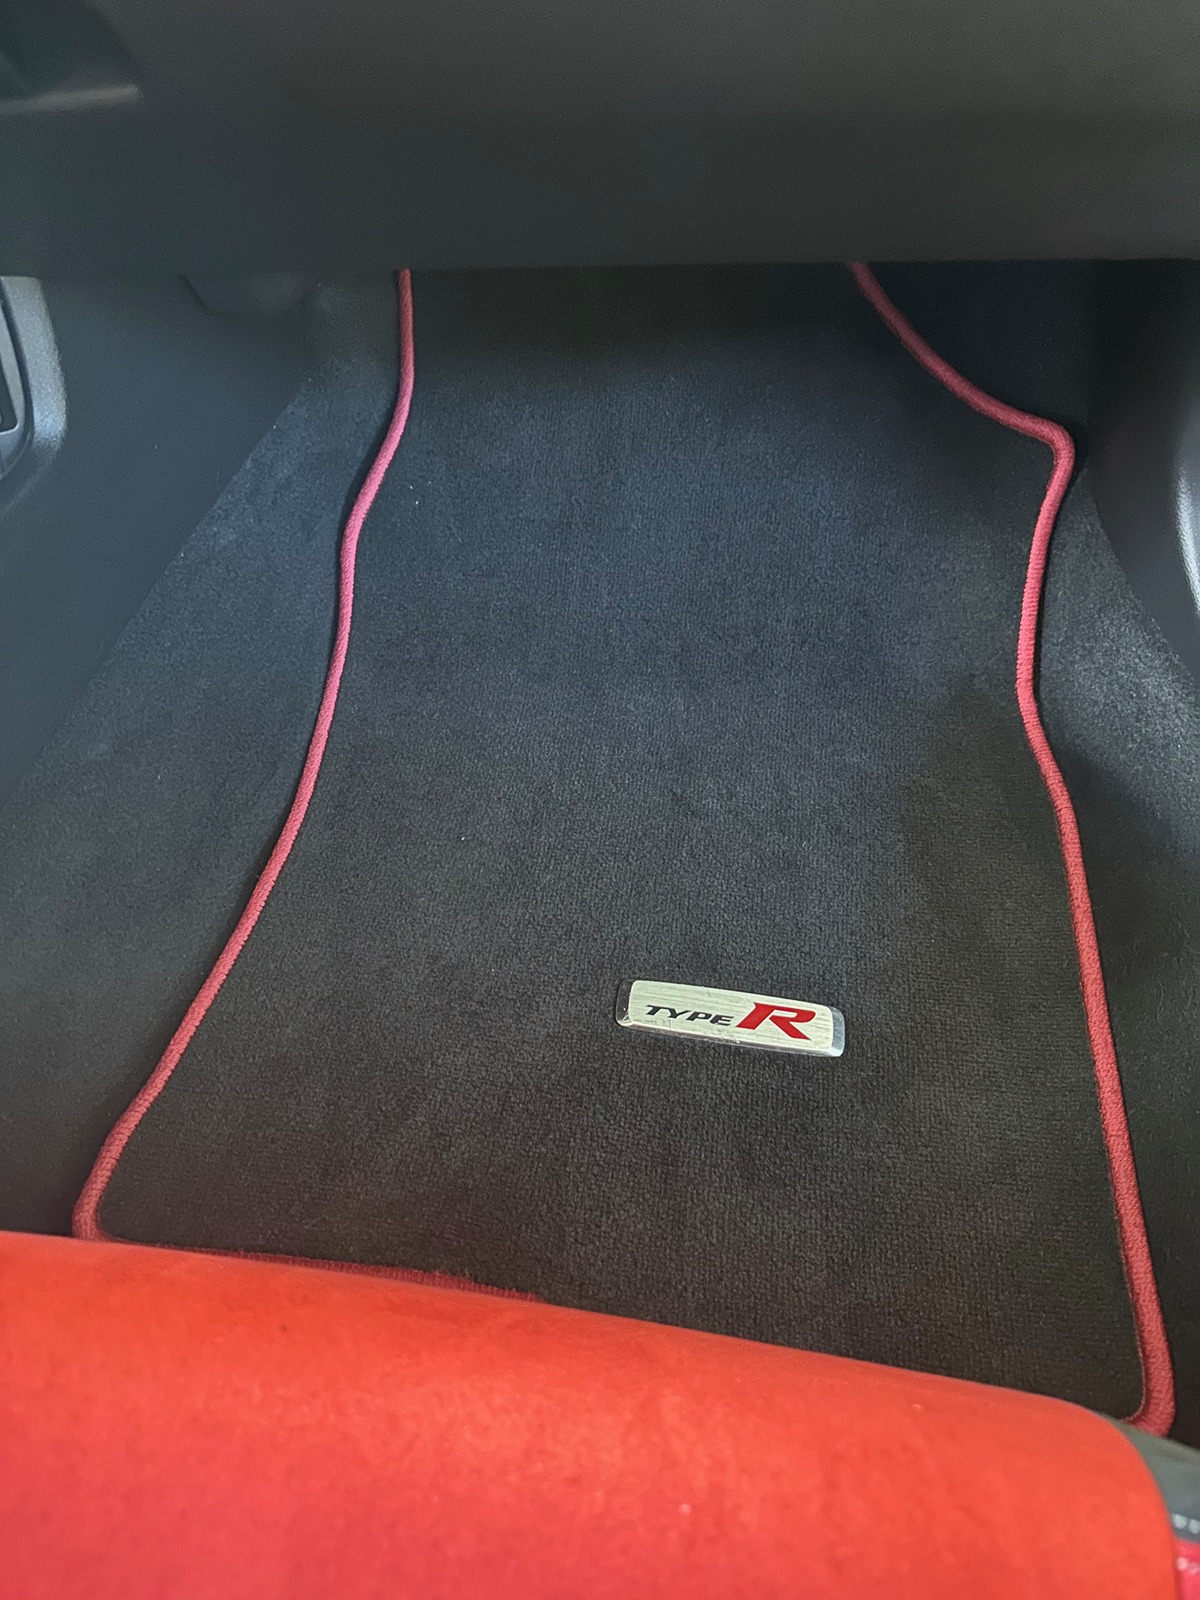 Honda Civic 10th gen Sold. 2019 Civic Type R for sale IMG_8198